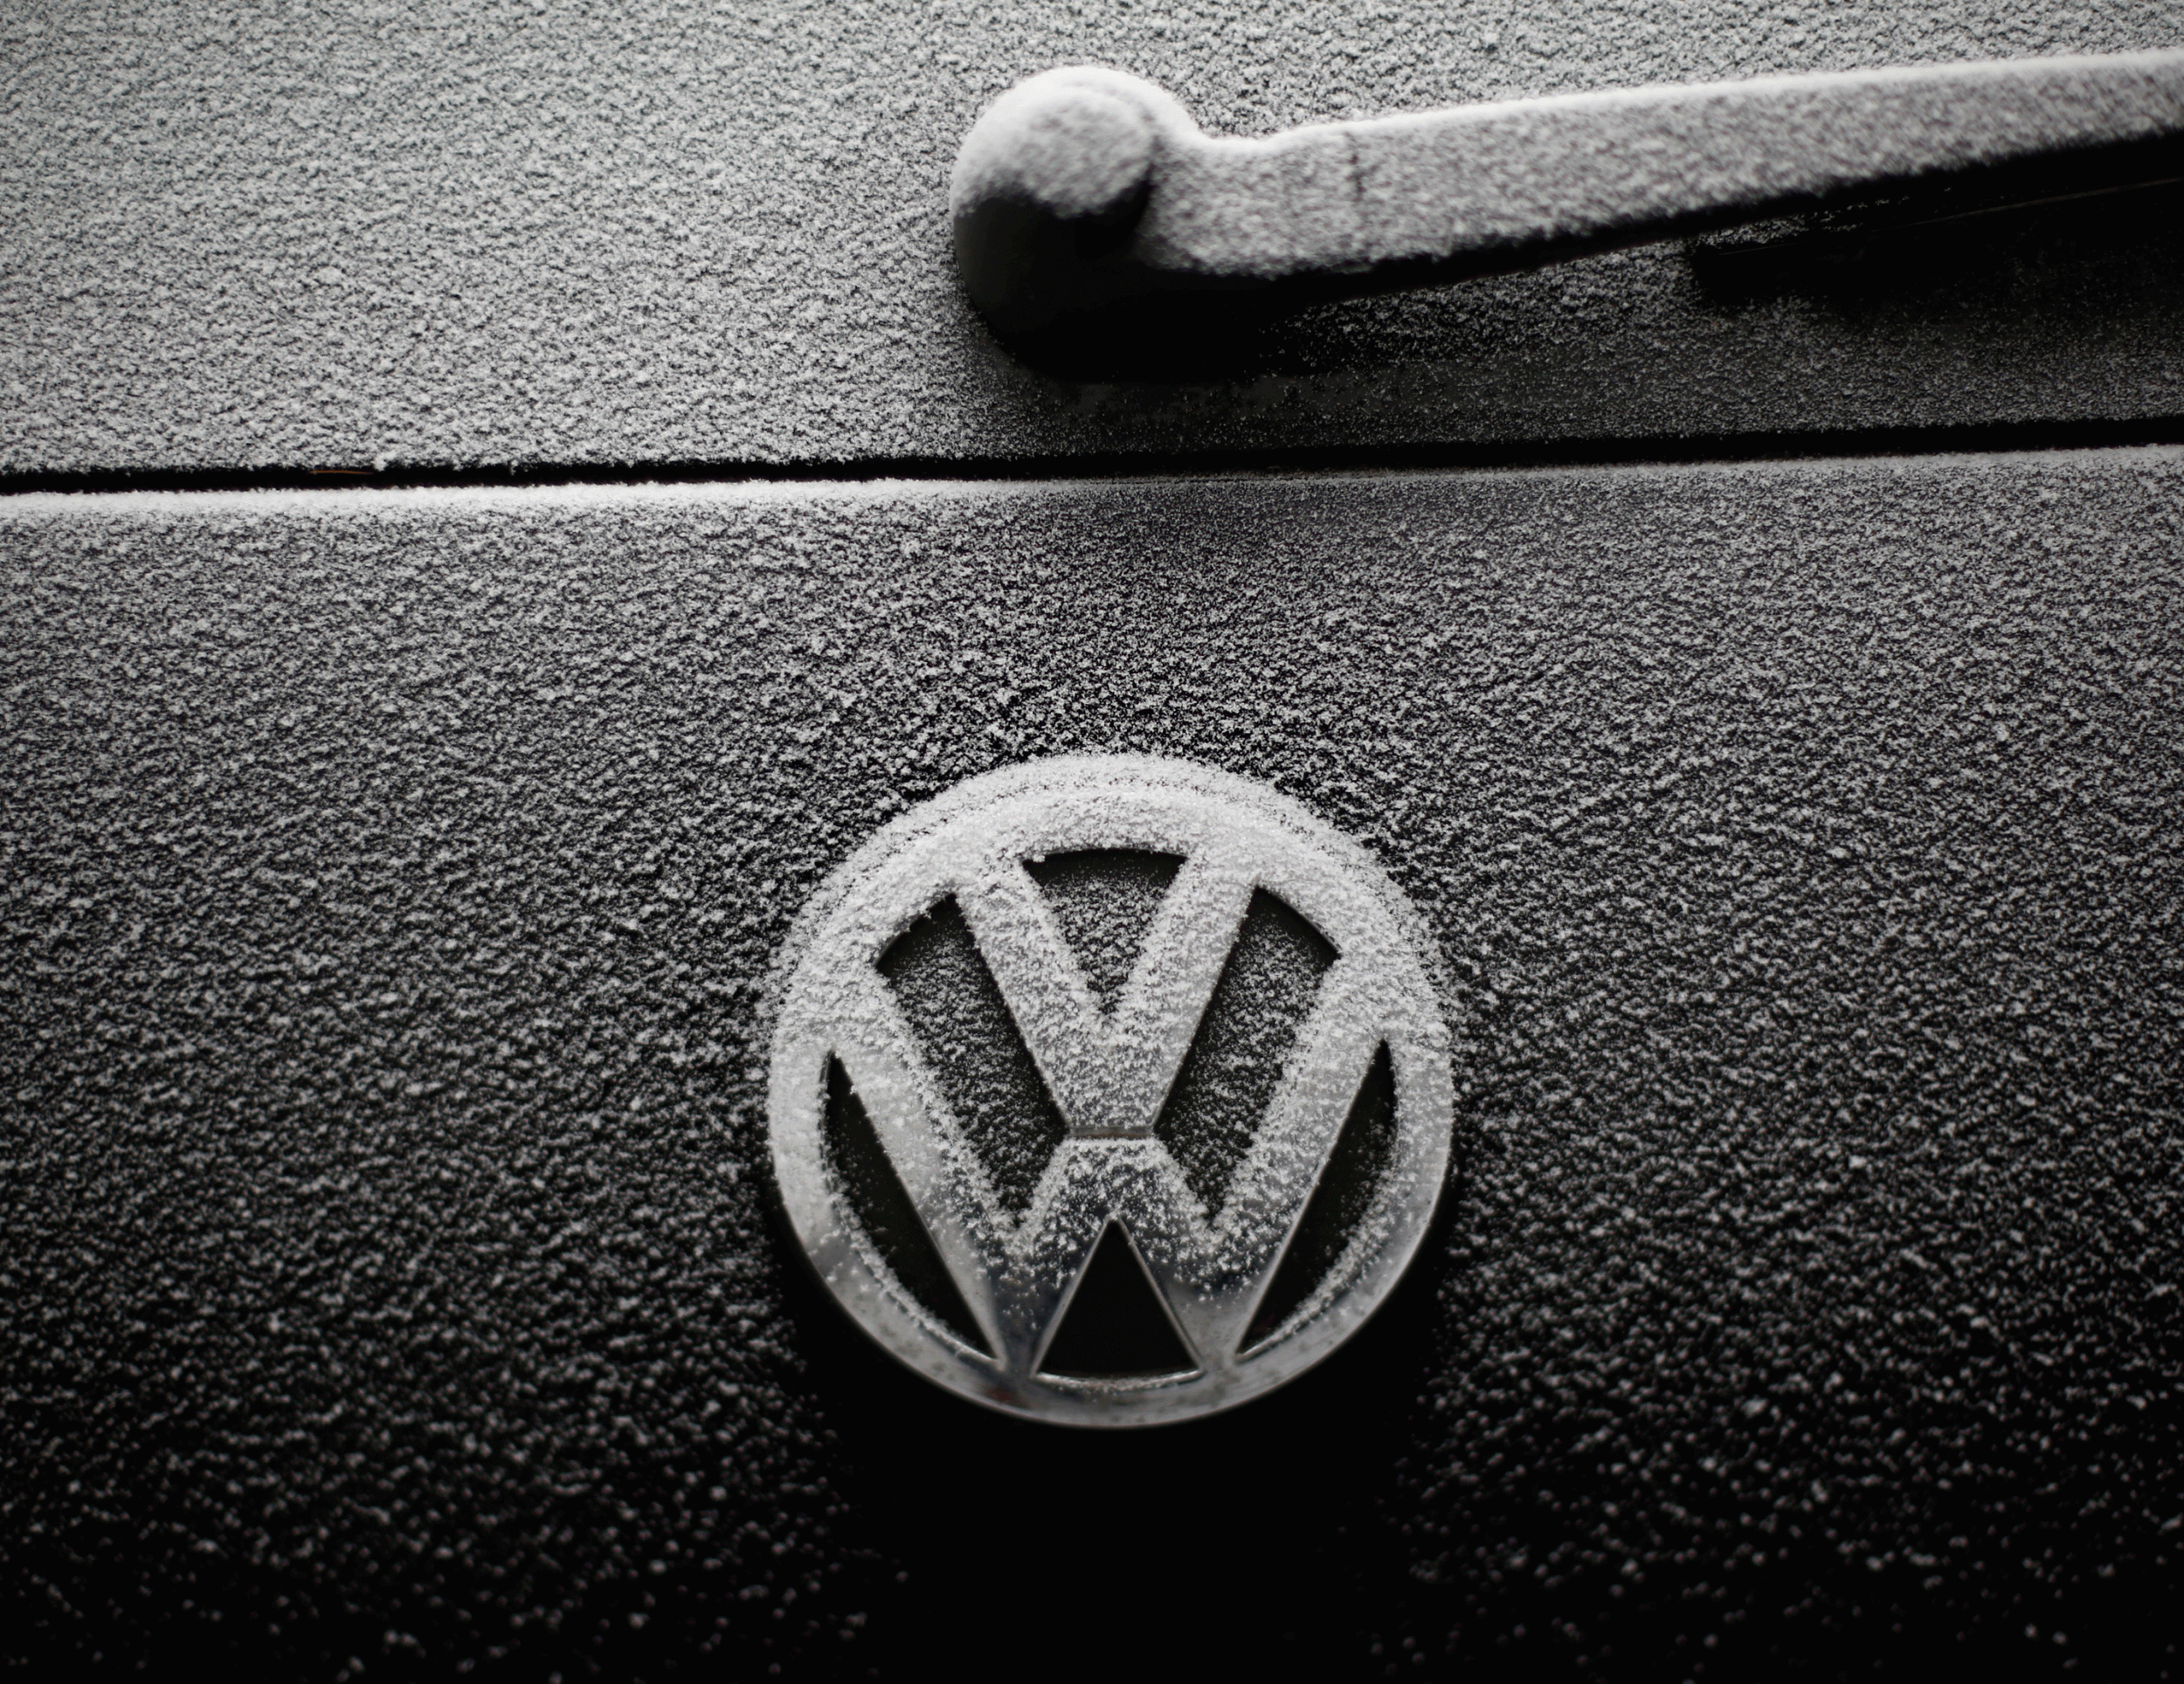 In September 2015, Volkswagen sent shockwaves through the entire global car industry when it admitted that it had installed so-called defeat devices in as many as 11 million diesel cars